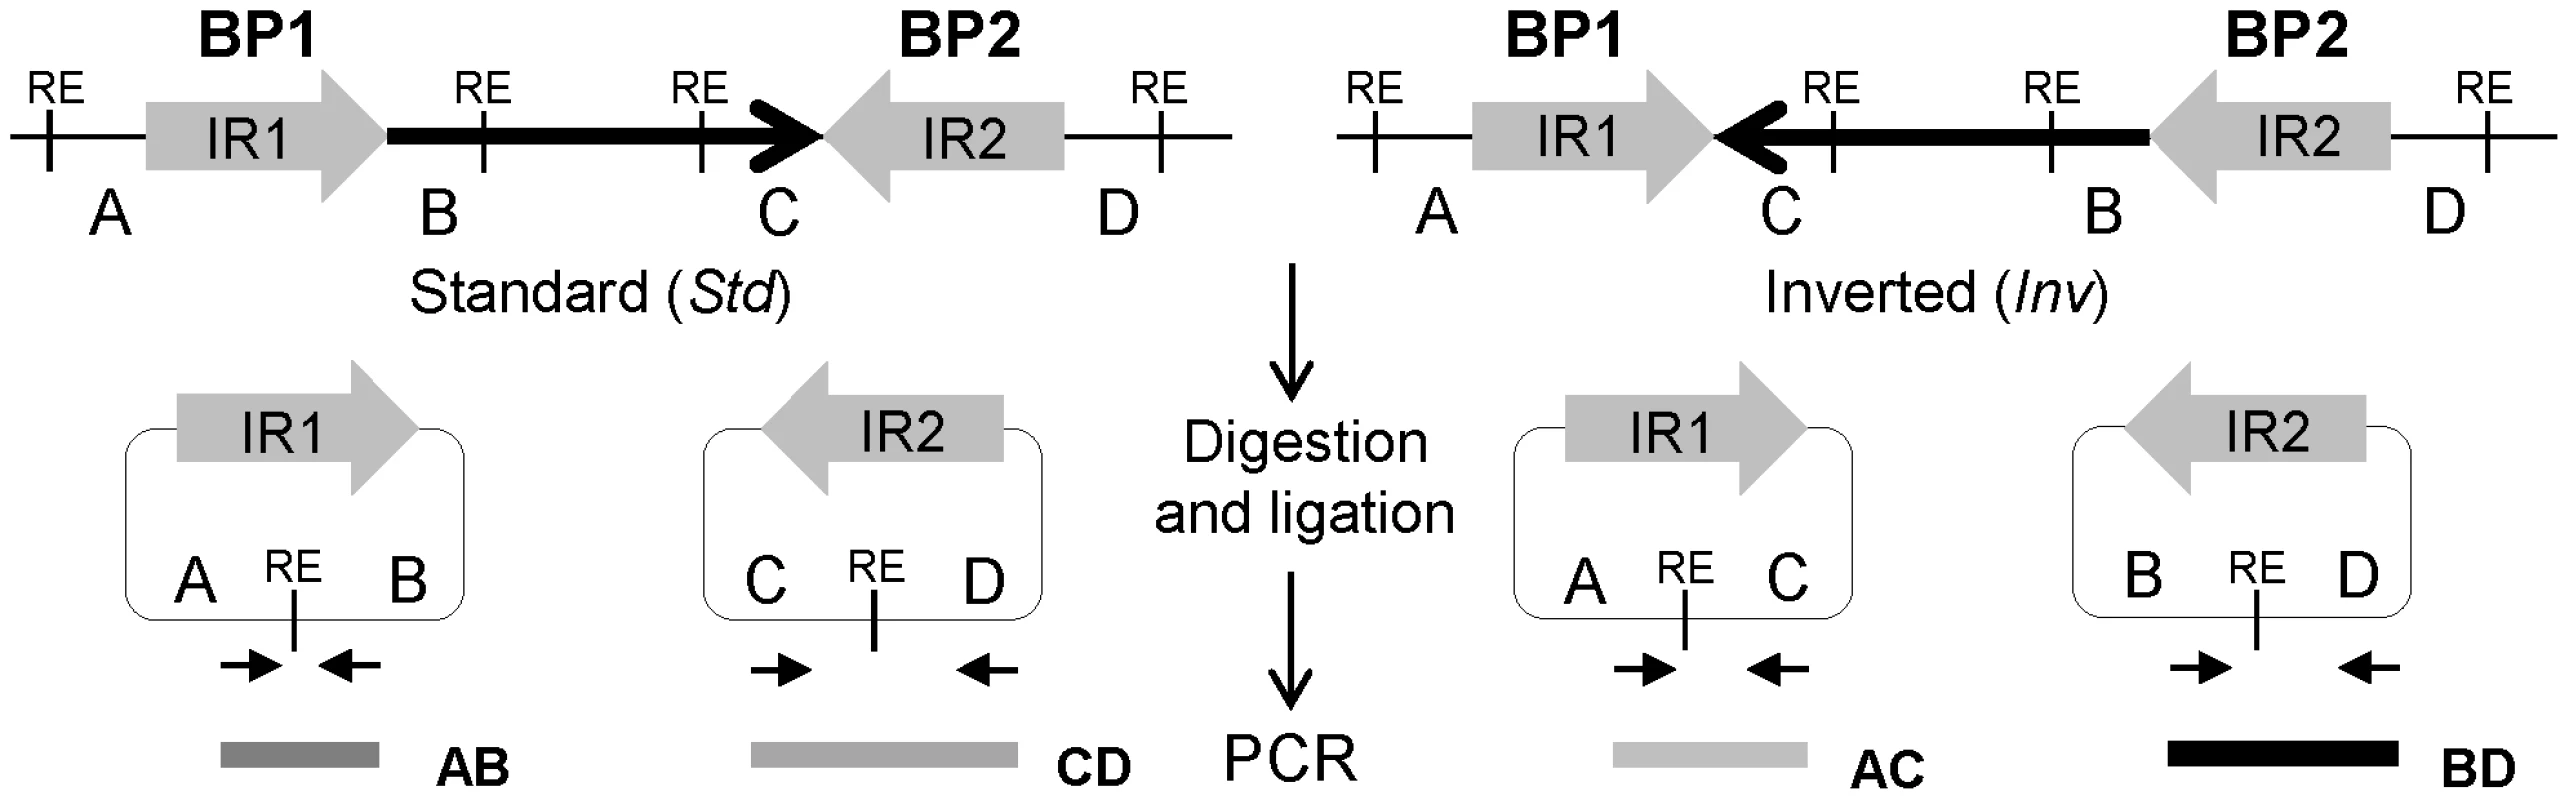 Diagram of iPCR validation of inversions mediated by inverted repeats (IRs).